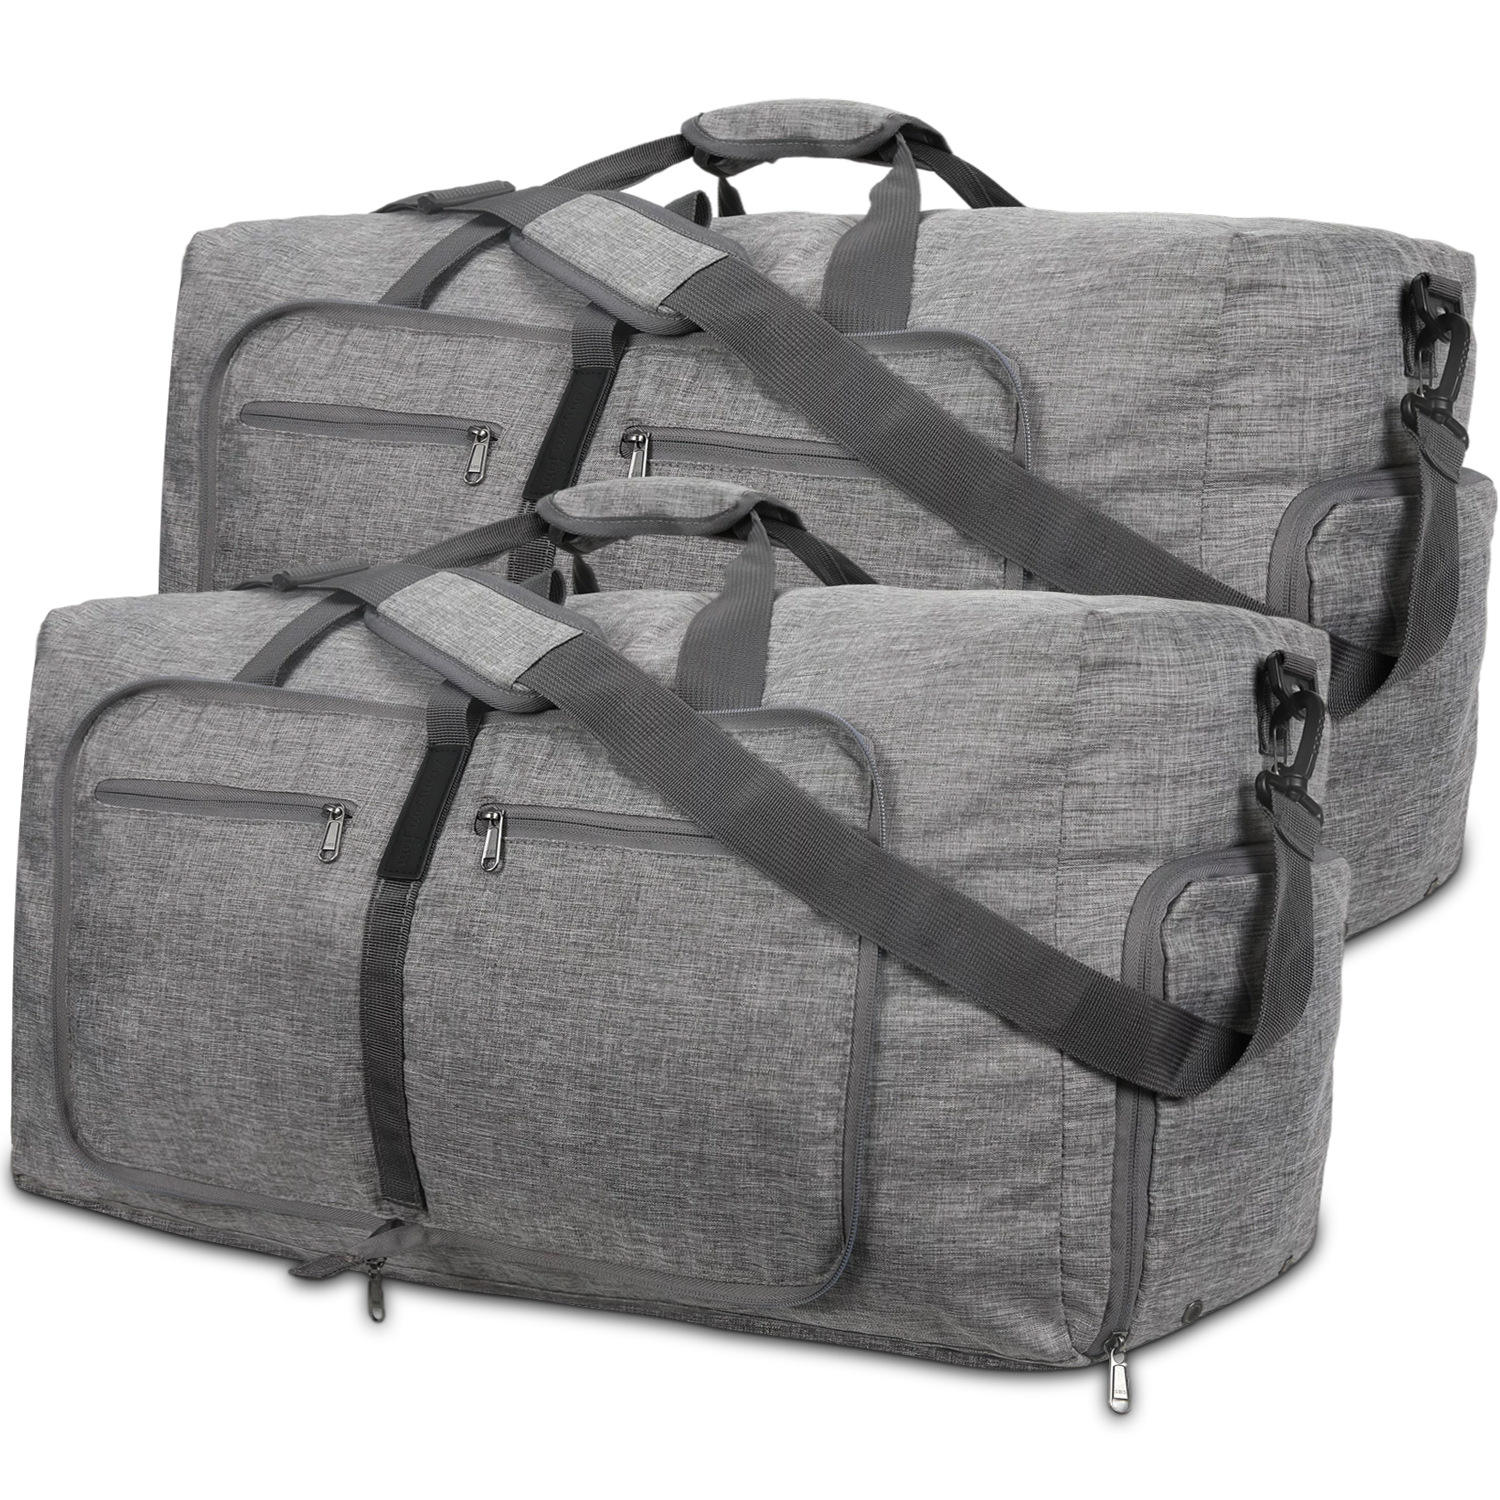 Sports Bag Foldable Travel Duffel Bag Large Capacity Duffle Bags with Single Strap